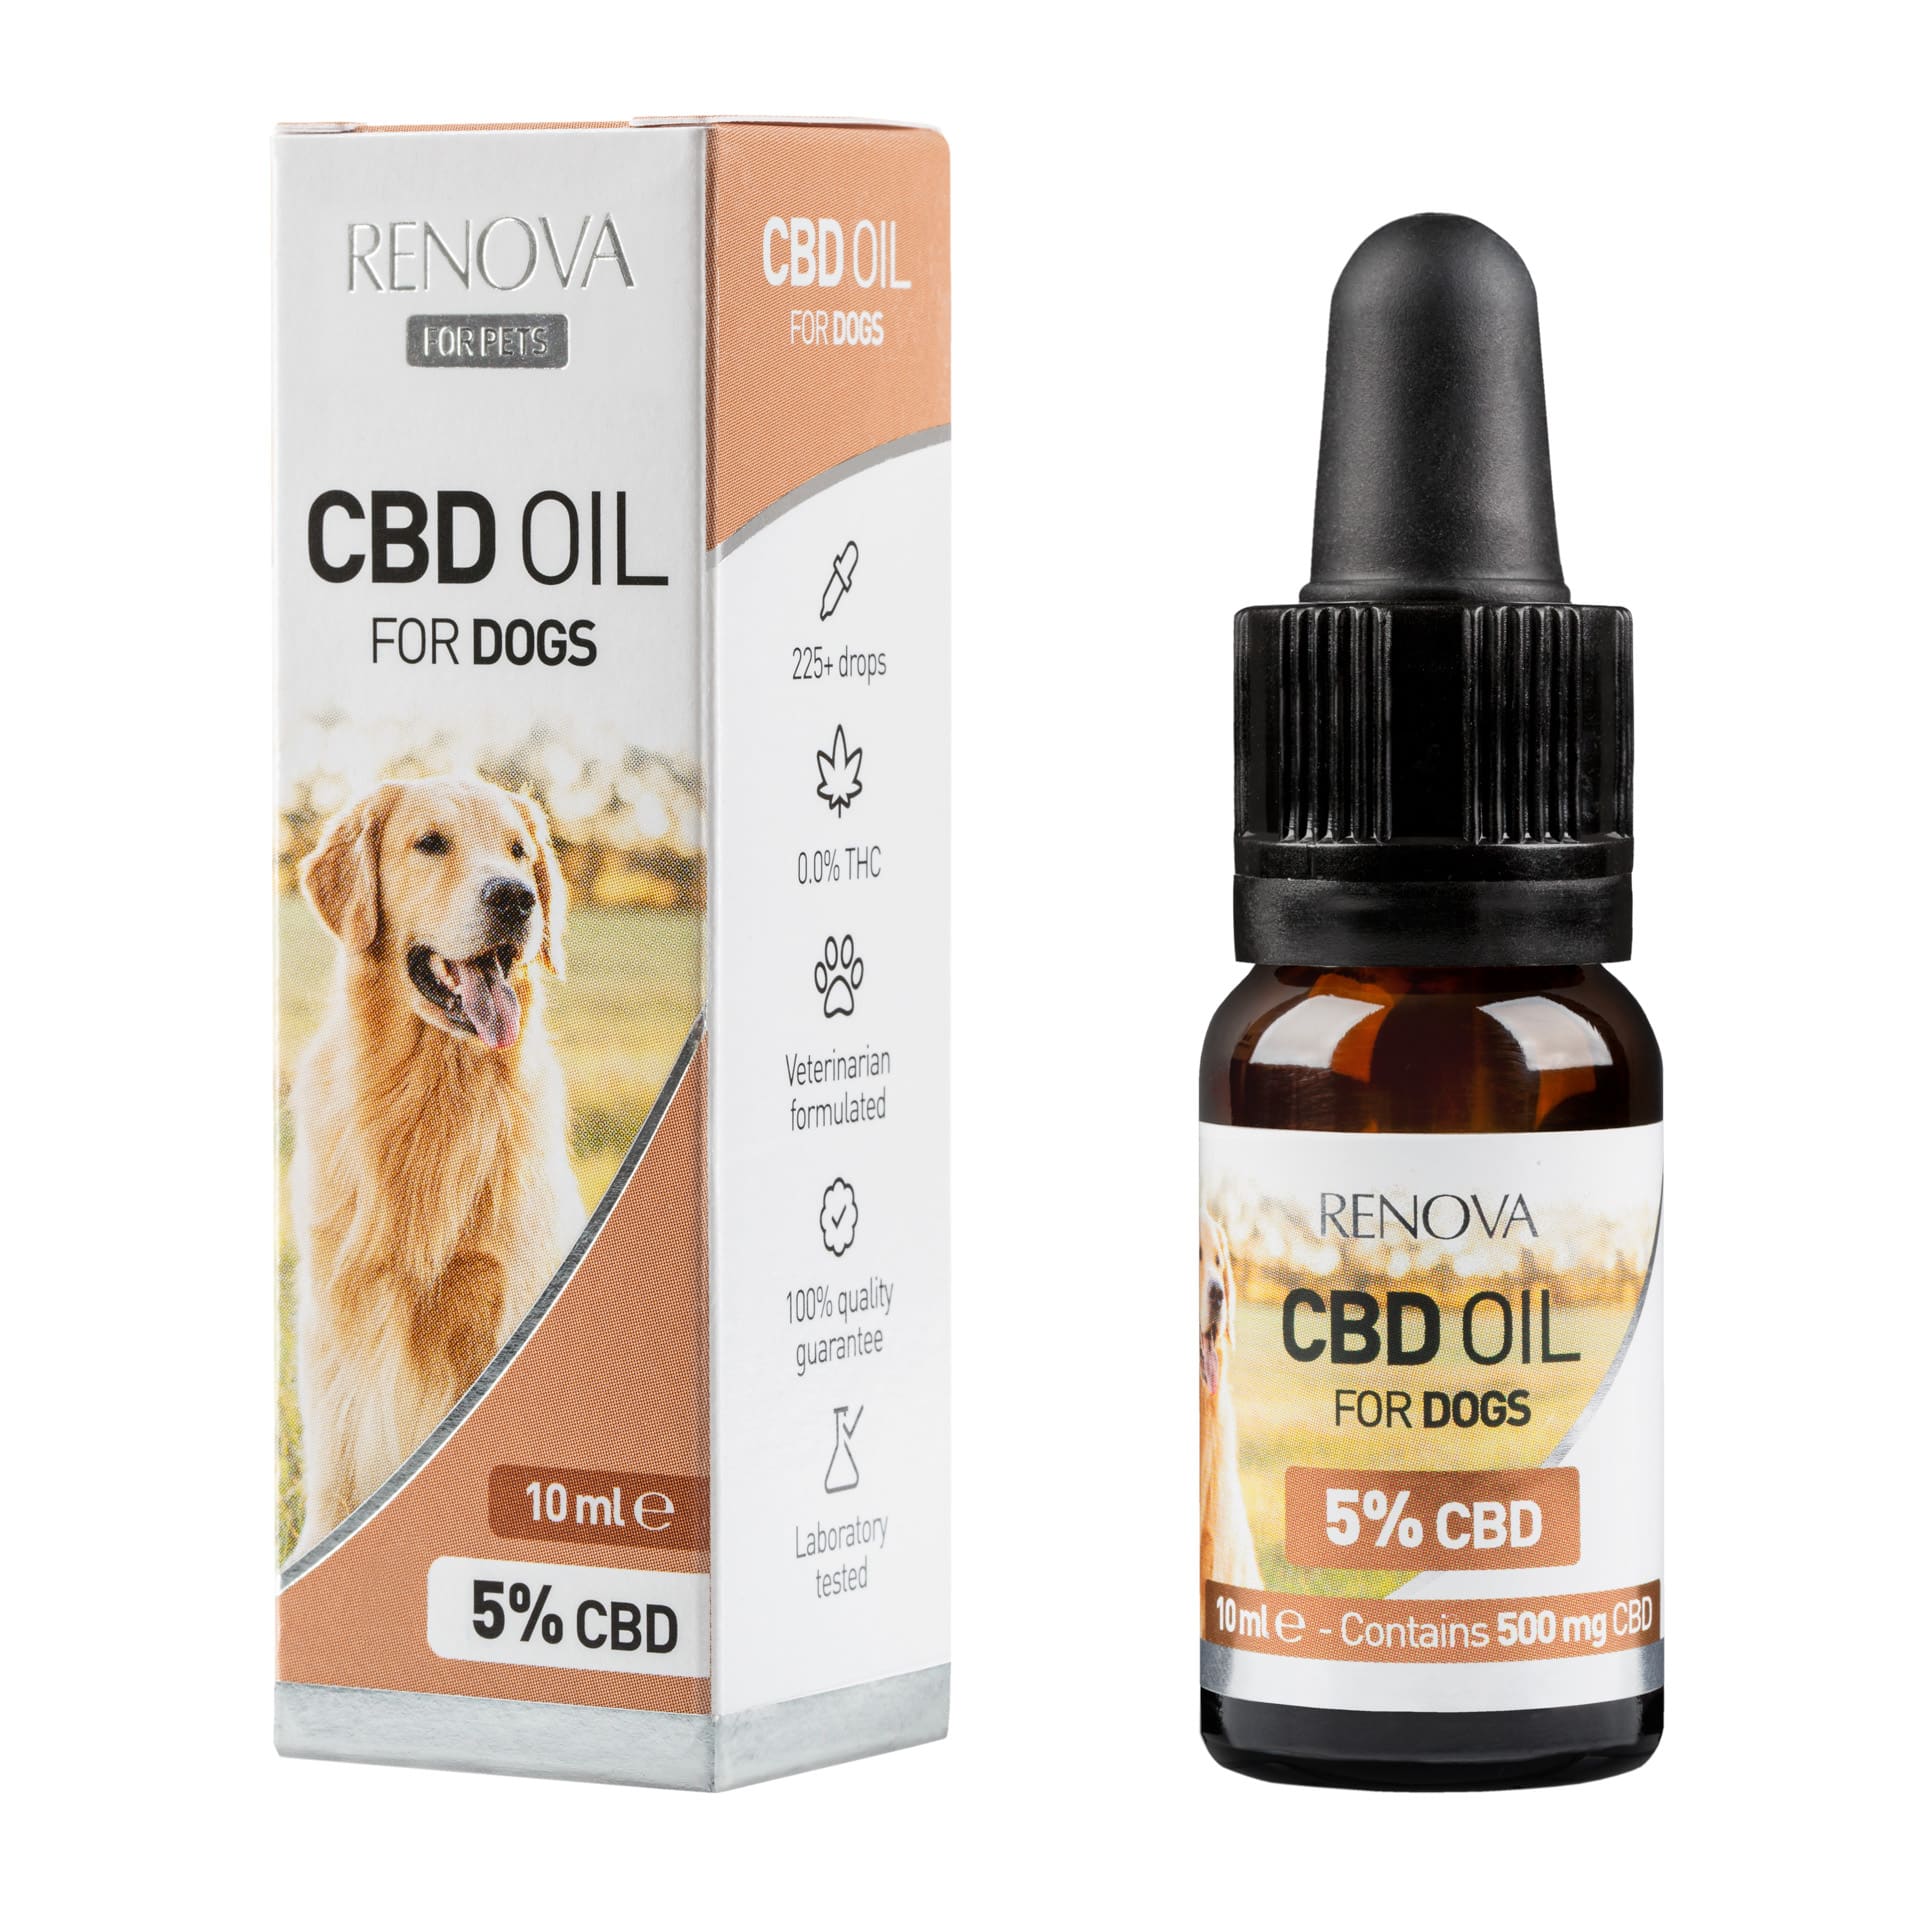 A bottle of Renova - CBD oil 5% for dogs next to a box of Renova - CBD oil 5% for dogs.